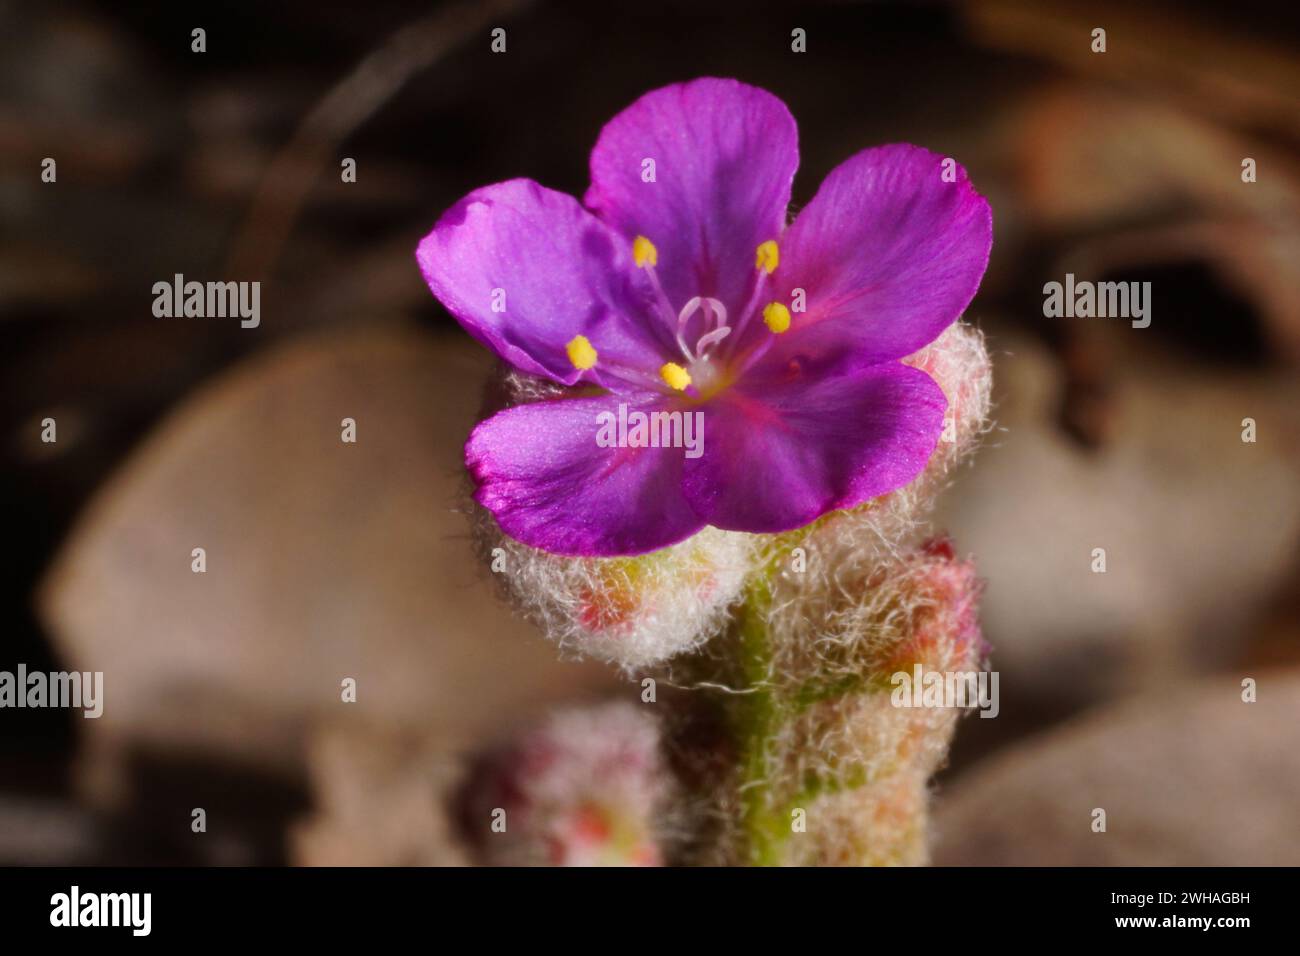 Pink flower of the carnivorous pygmy sundew Drosera lasiantha, flower stalk covered in wooly hairs, in natural habitat, Western Australia Stock Photo